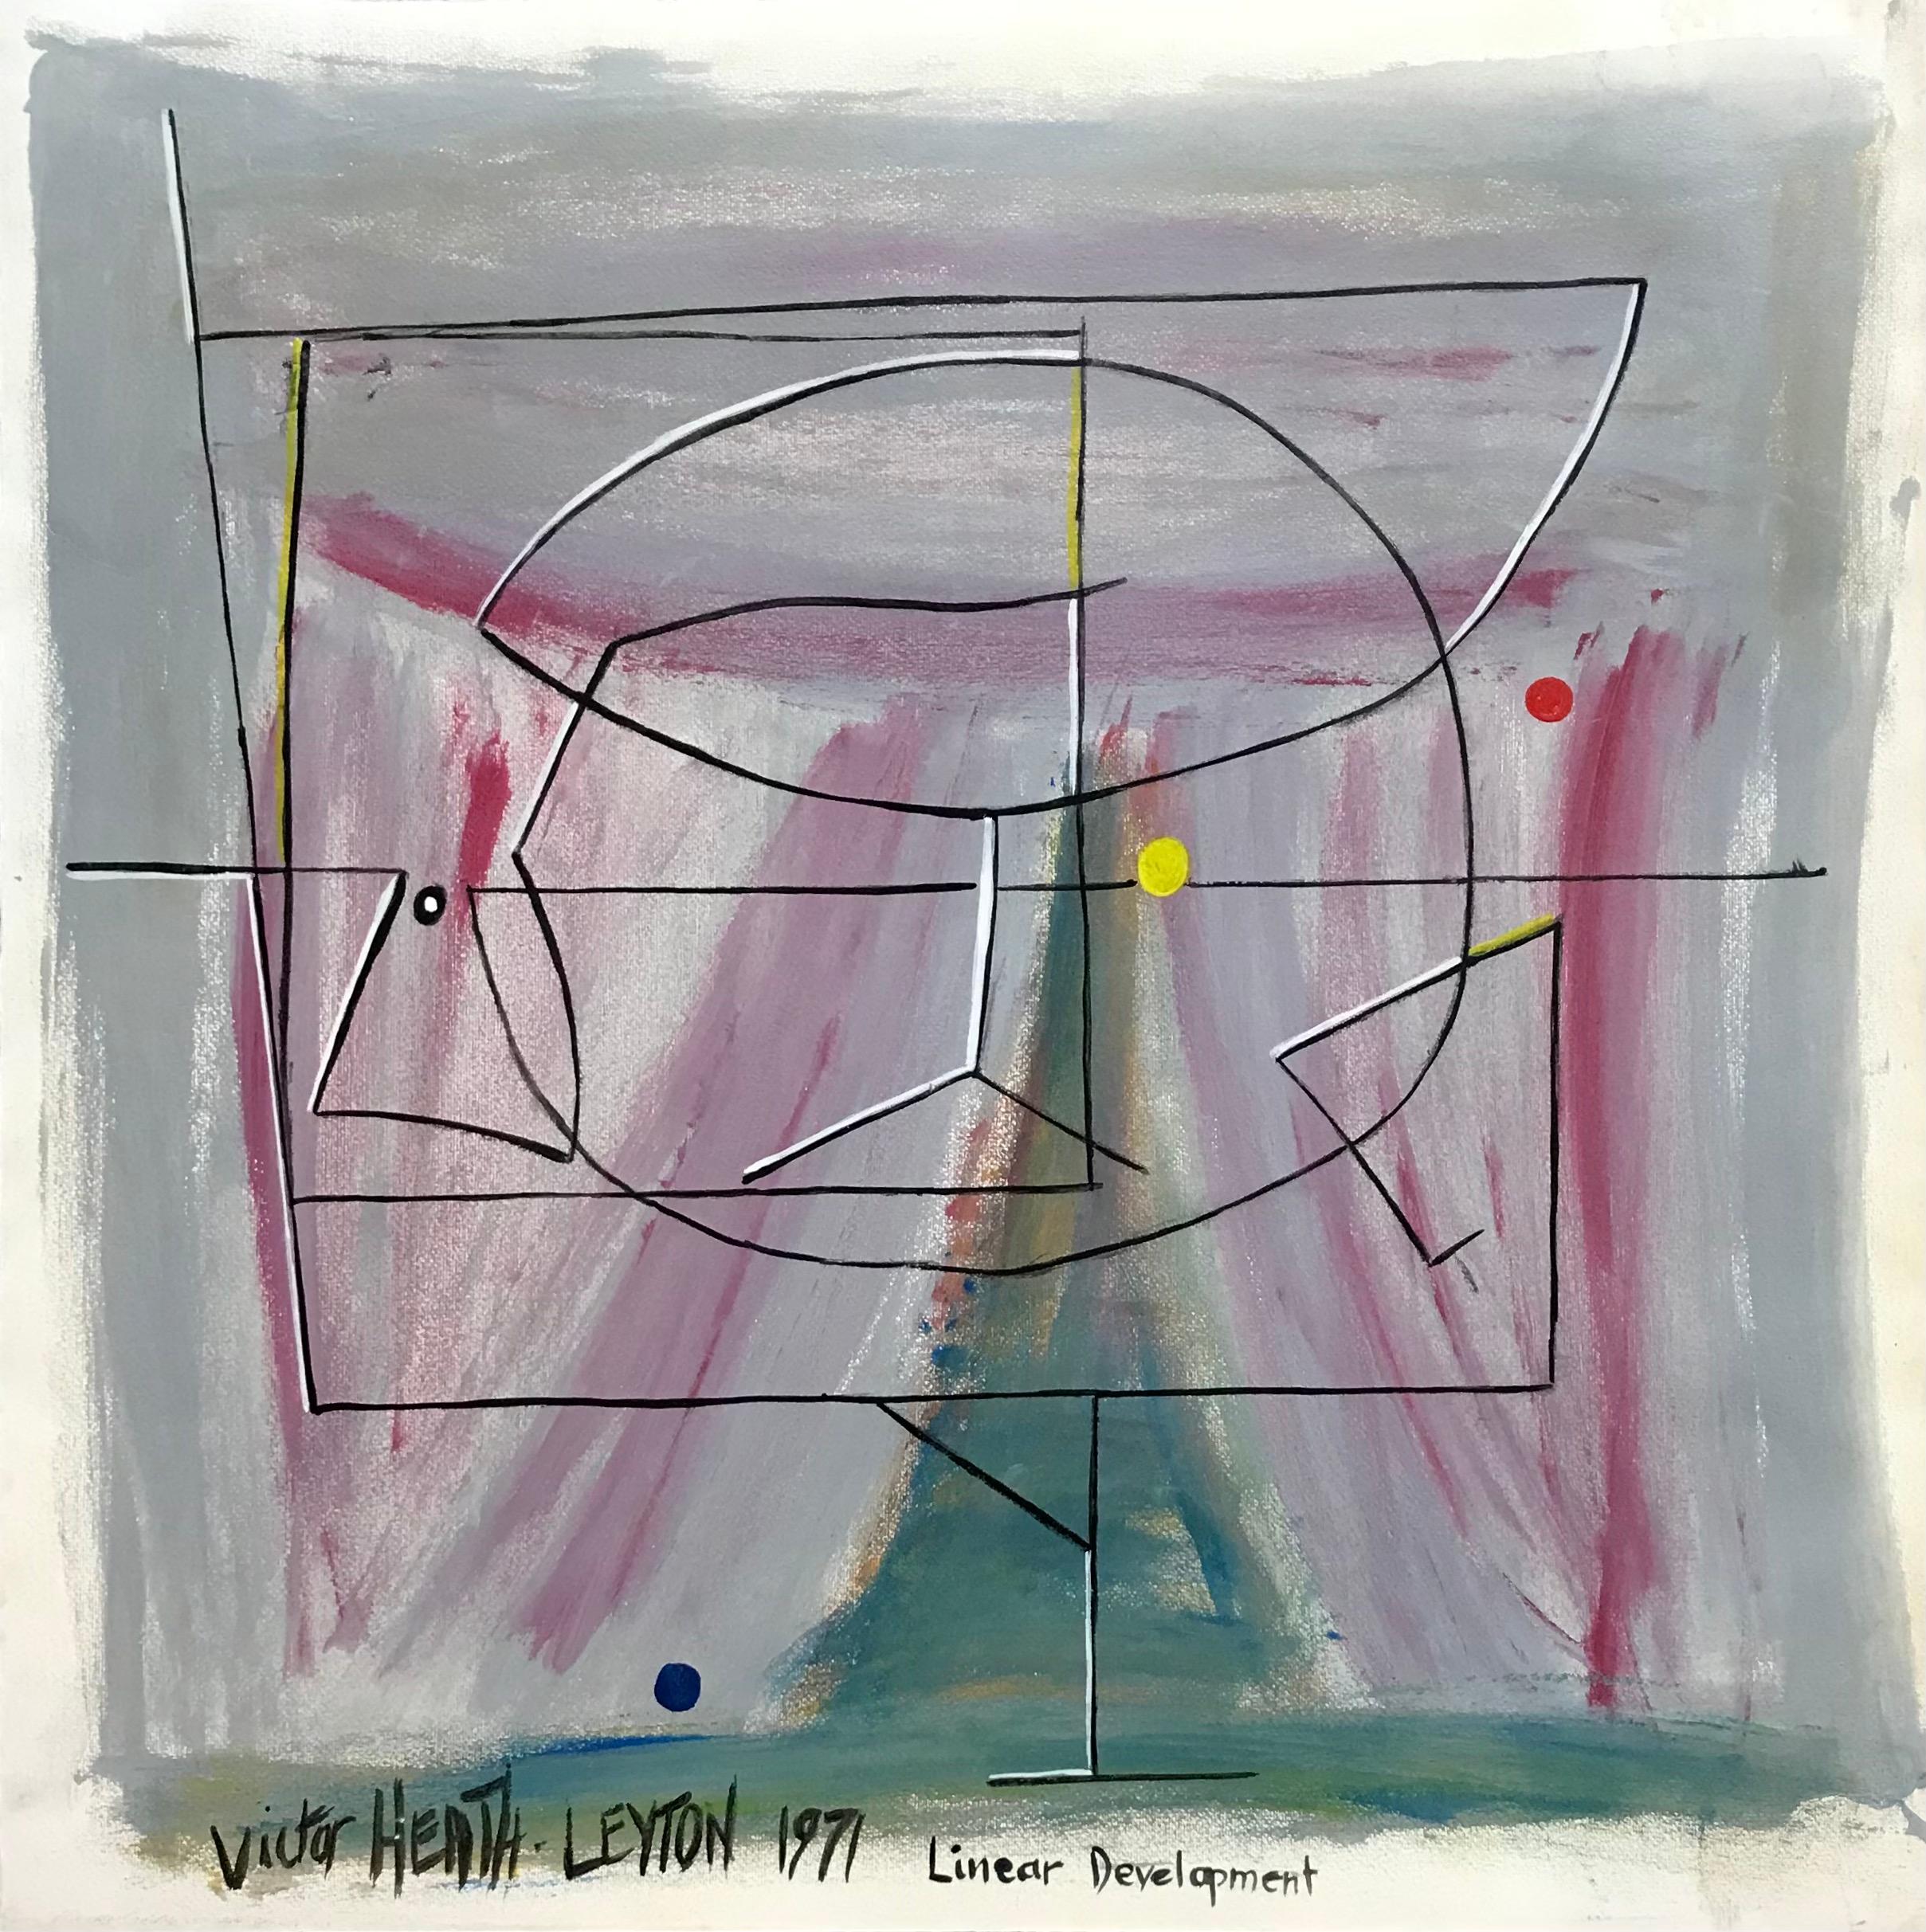 Victor Heath-Leyton Abstract Painting - Linear Development by Victor Heath-Leytron - Oil on paper 58x58 cm